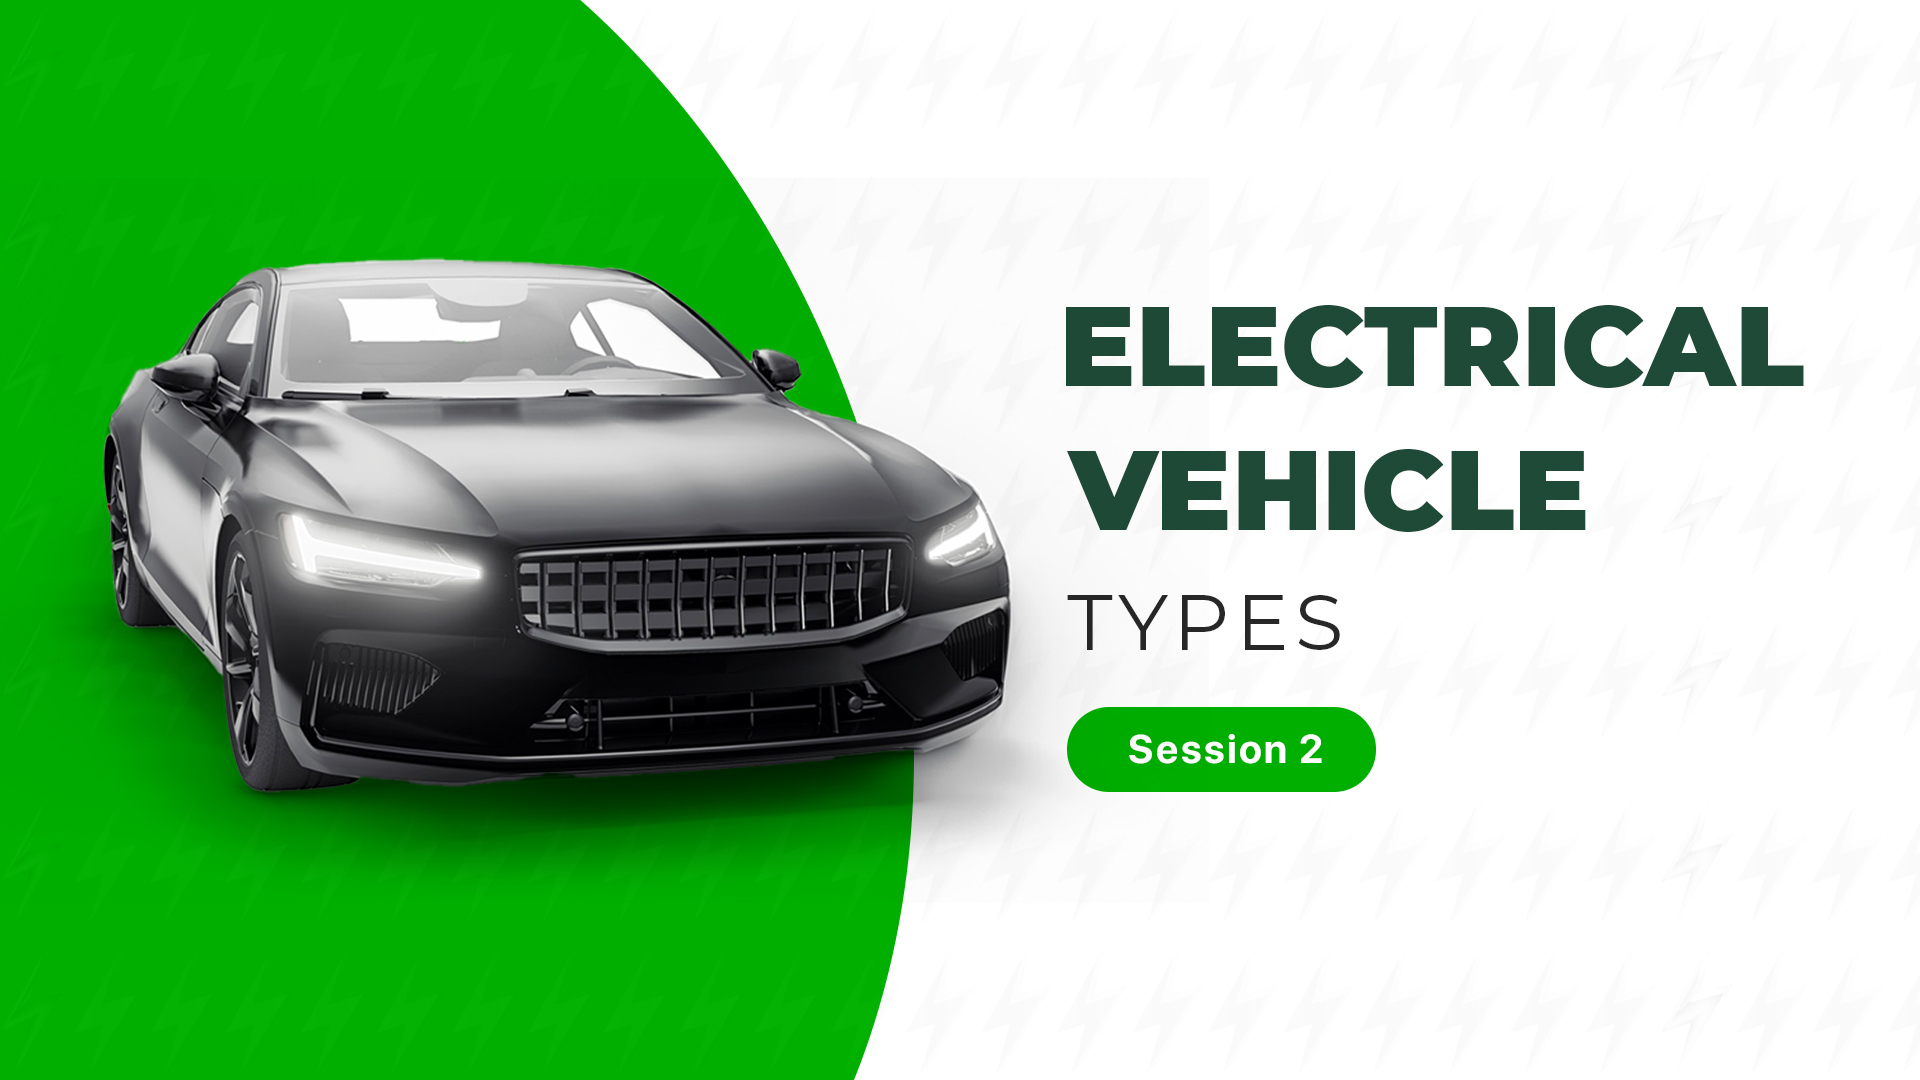 types of electric vehicles